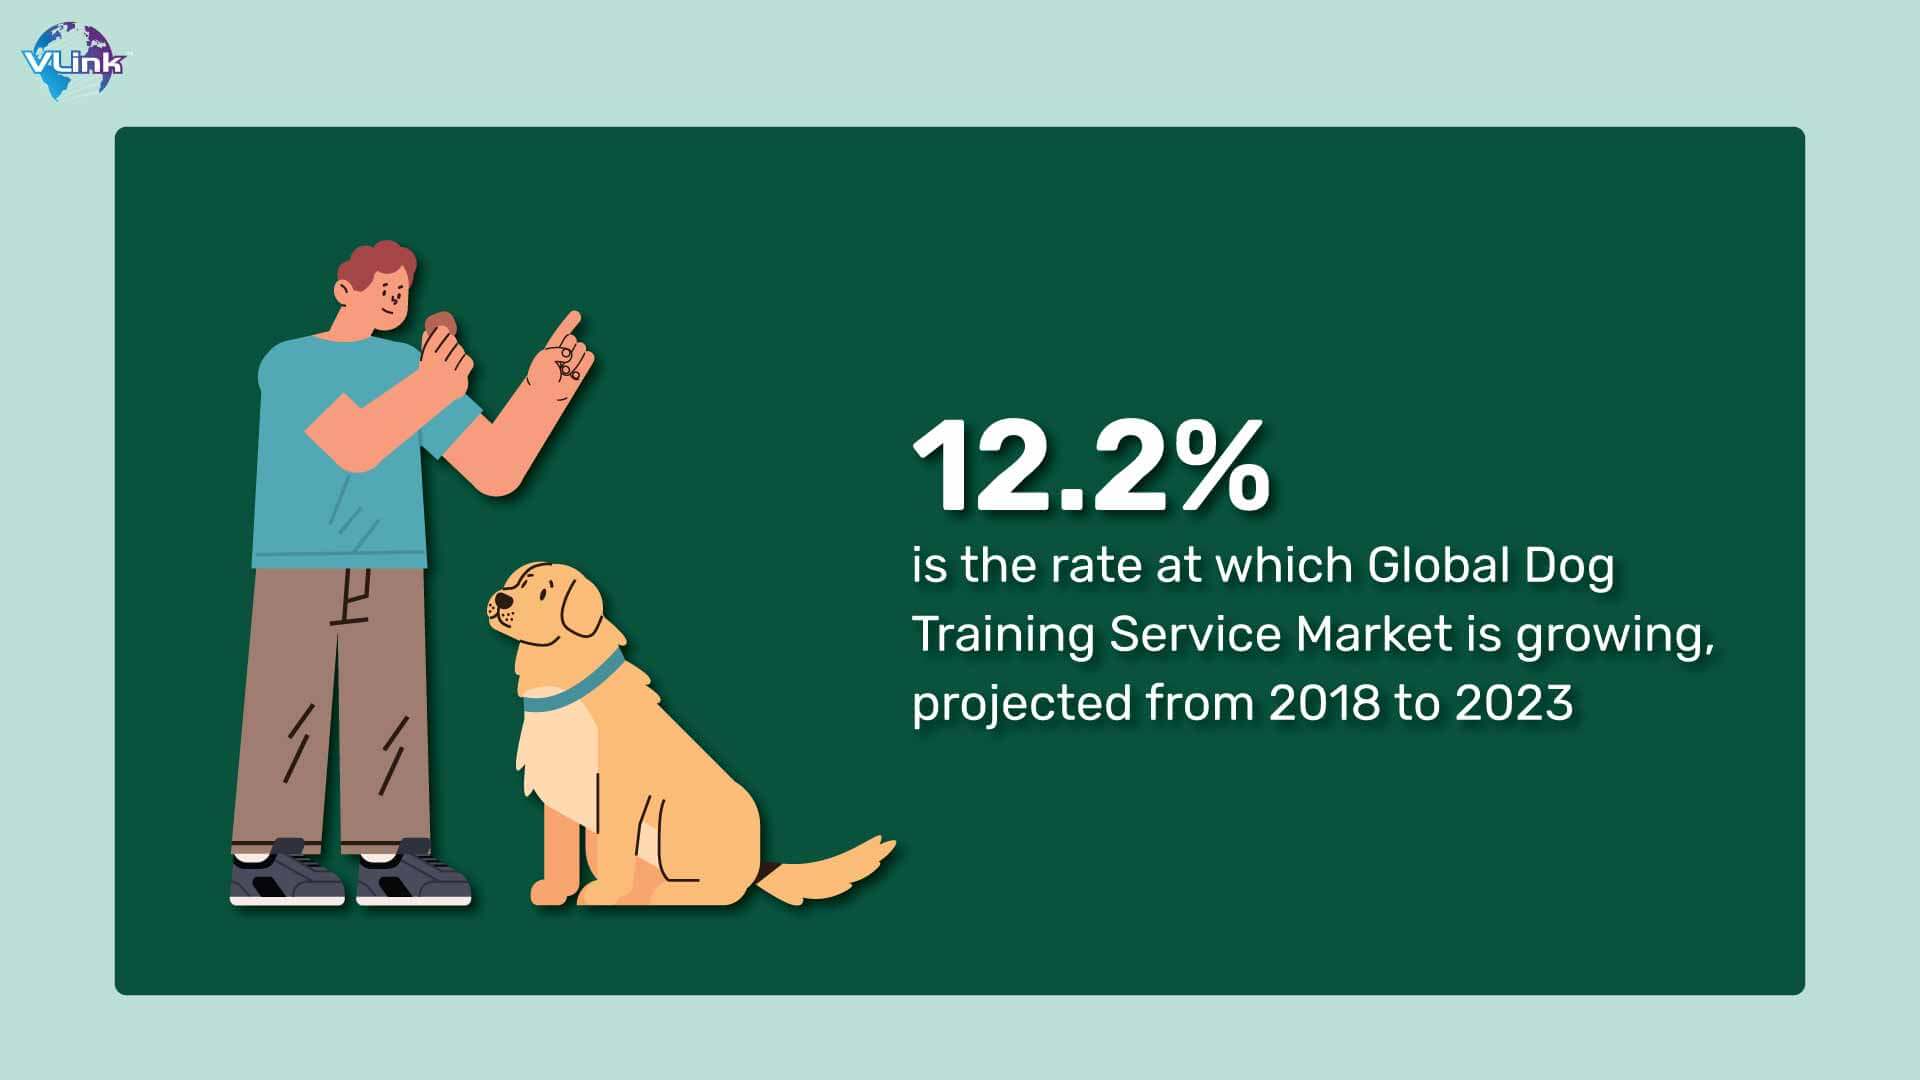 12.2% is the rate at which Global Dog Training Service Market is growing, projected from 2018 to 2023